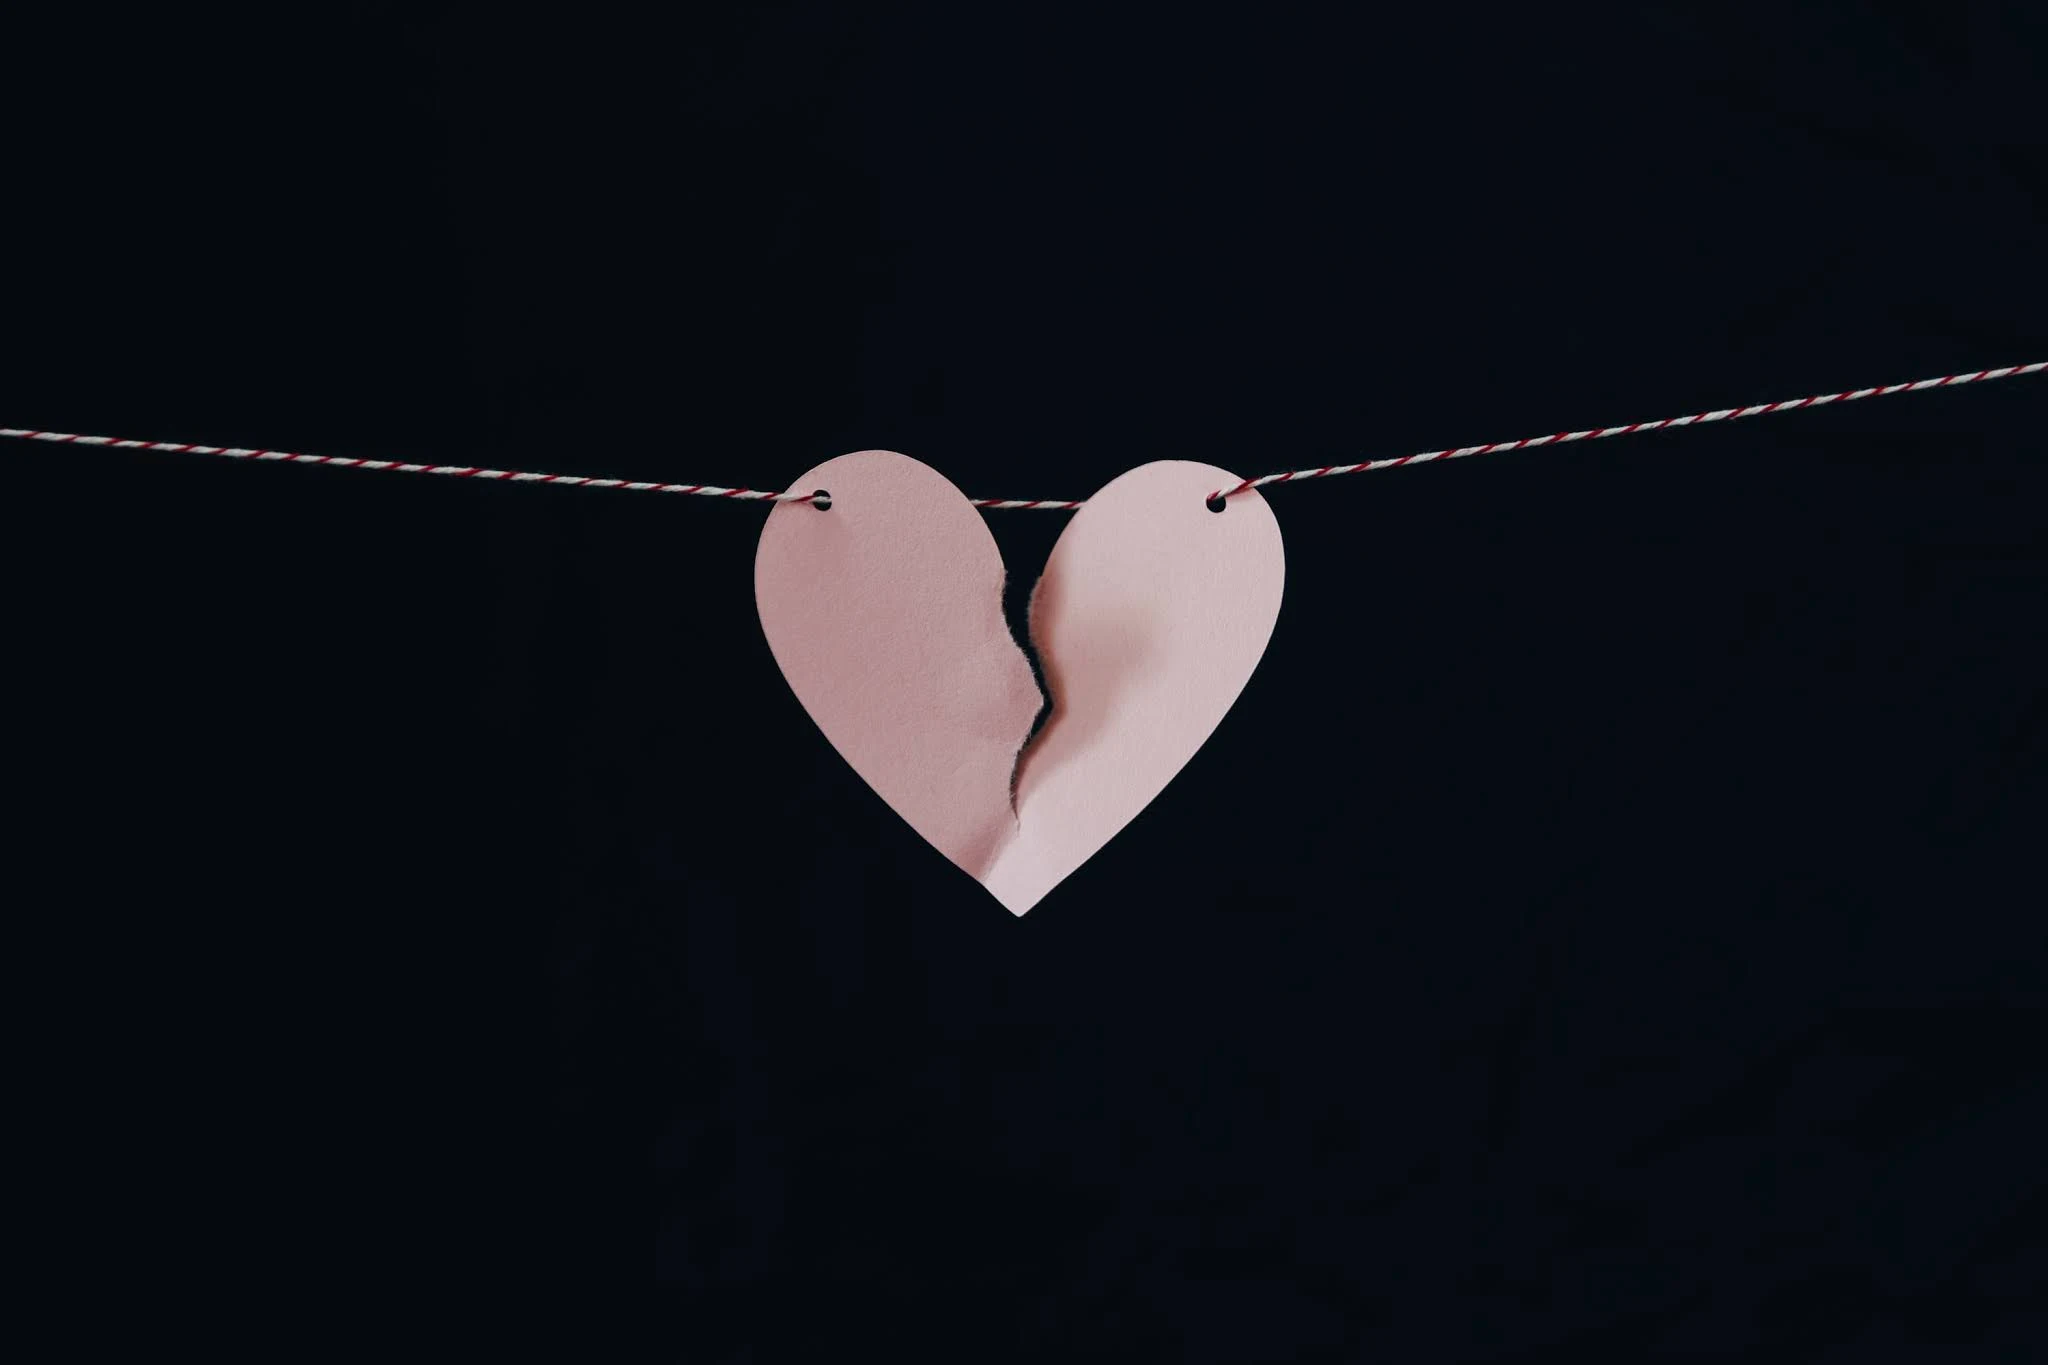 A paper heart on a string ripped in two